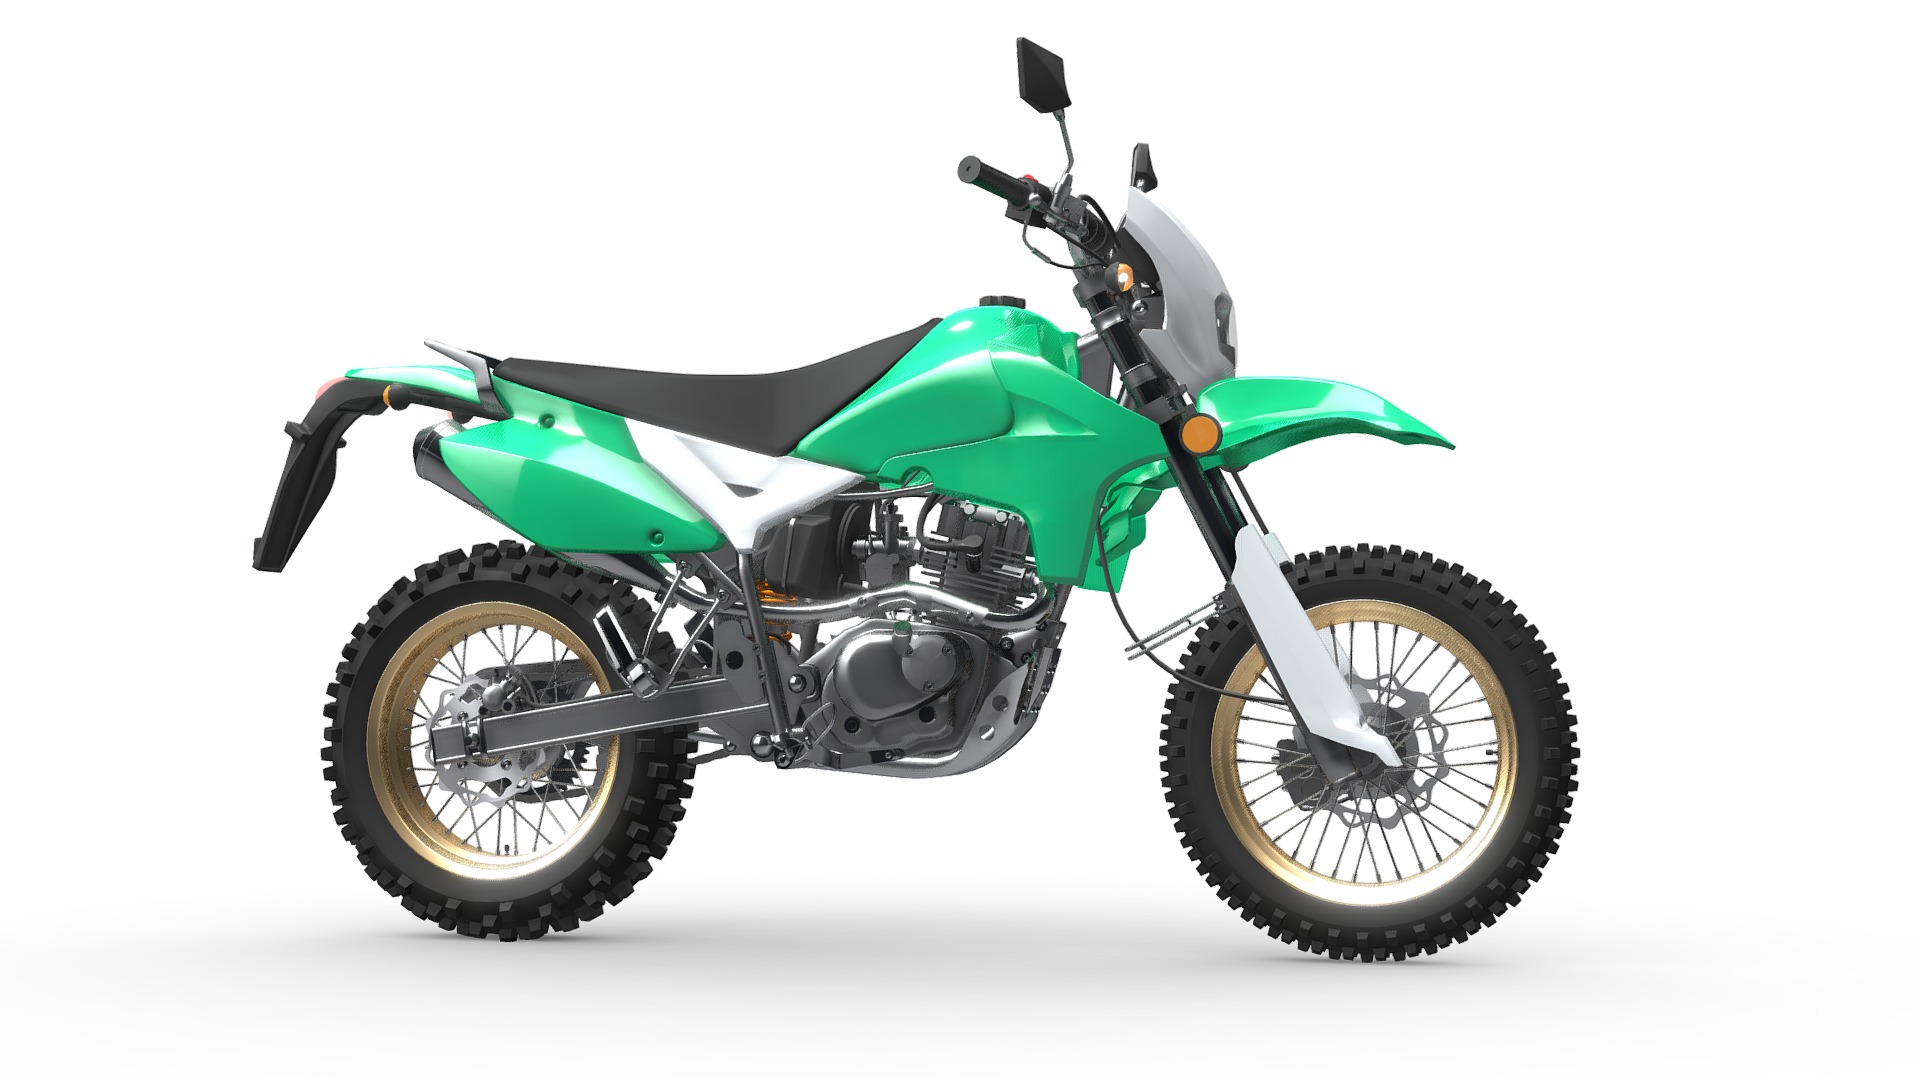 3D model Enduro bike - This is a 3D model of the Enduro bike. The 3D model is about a green and black motorcycle.